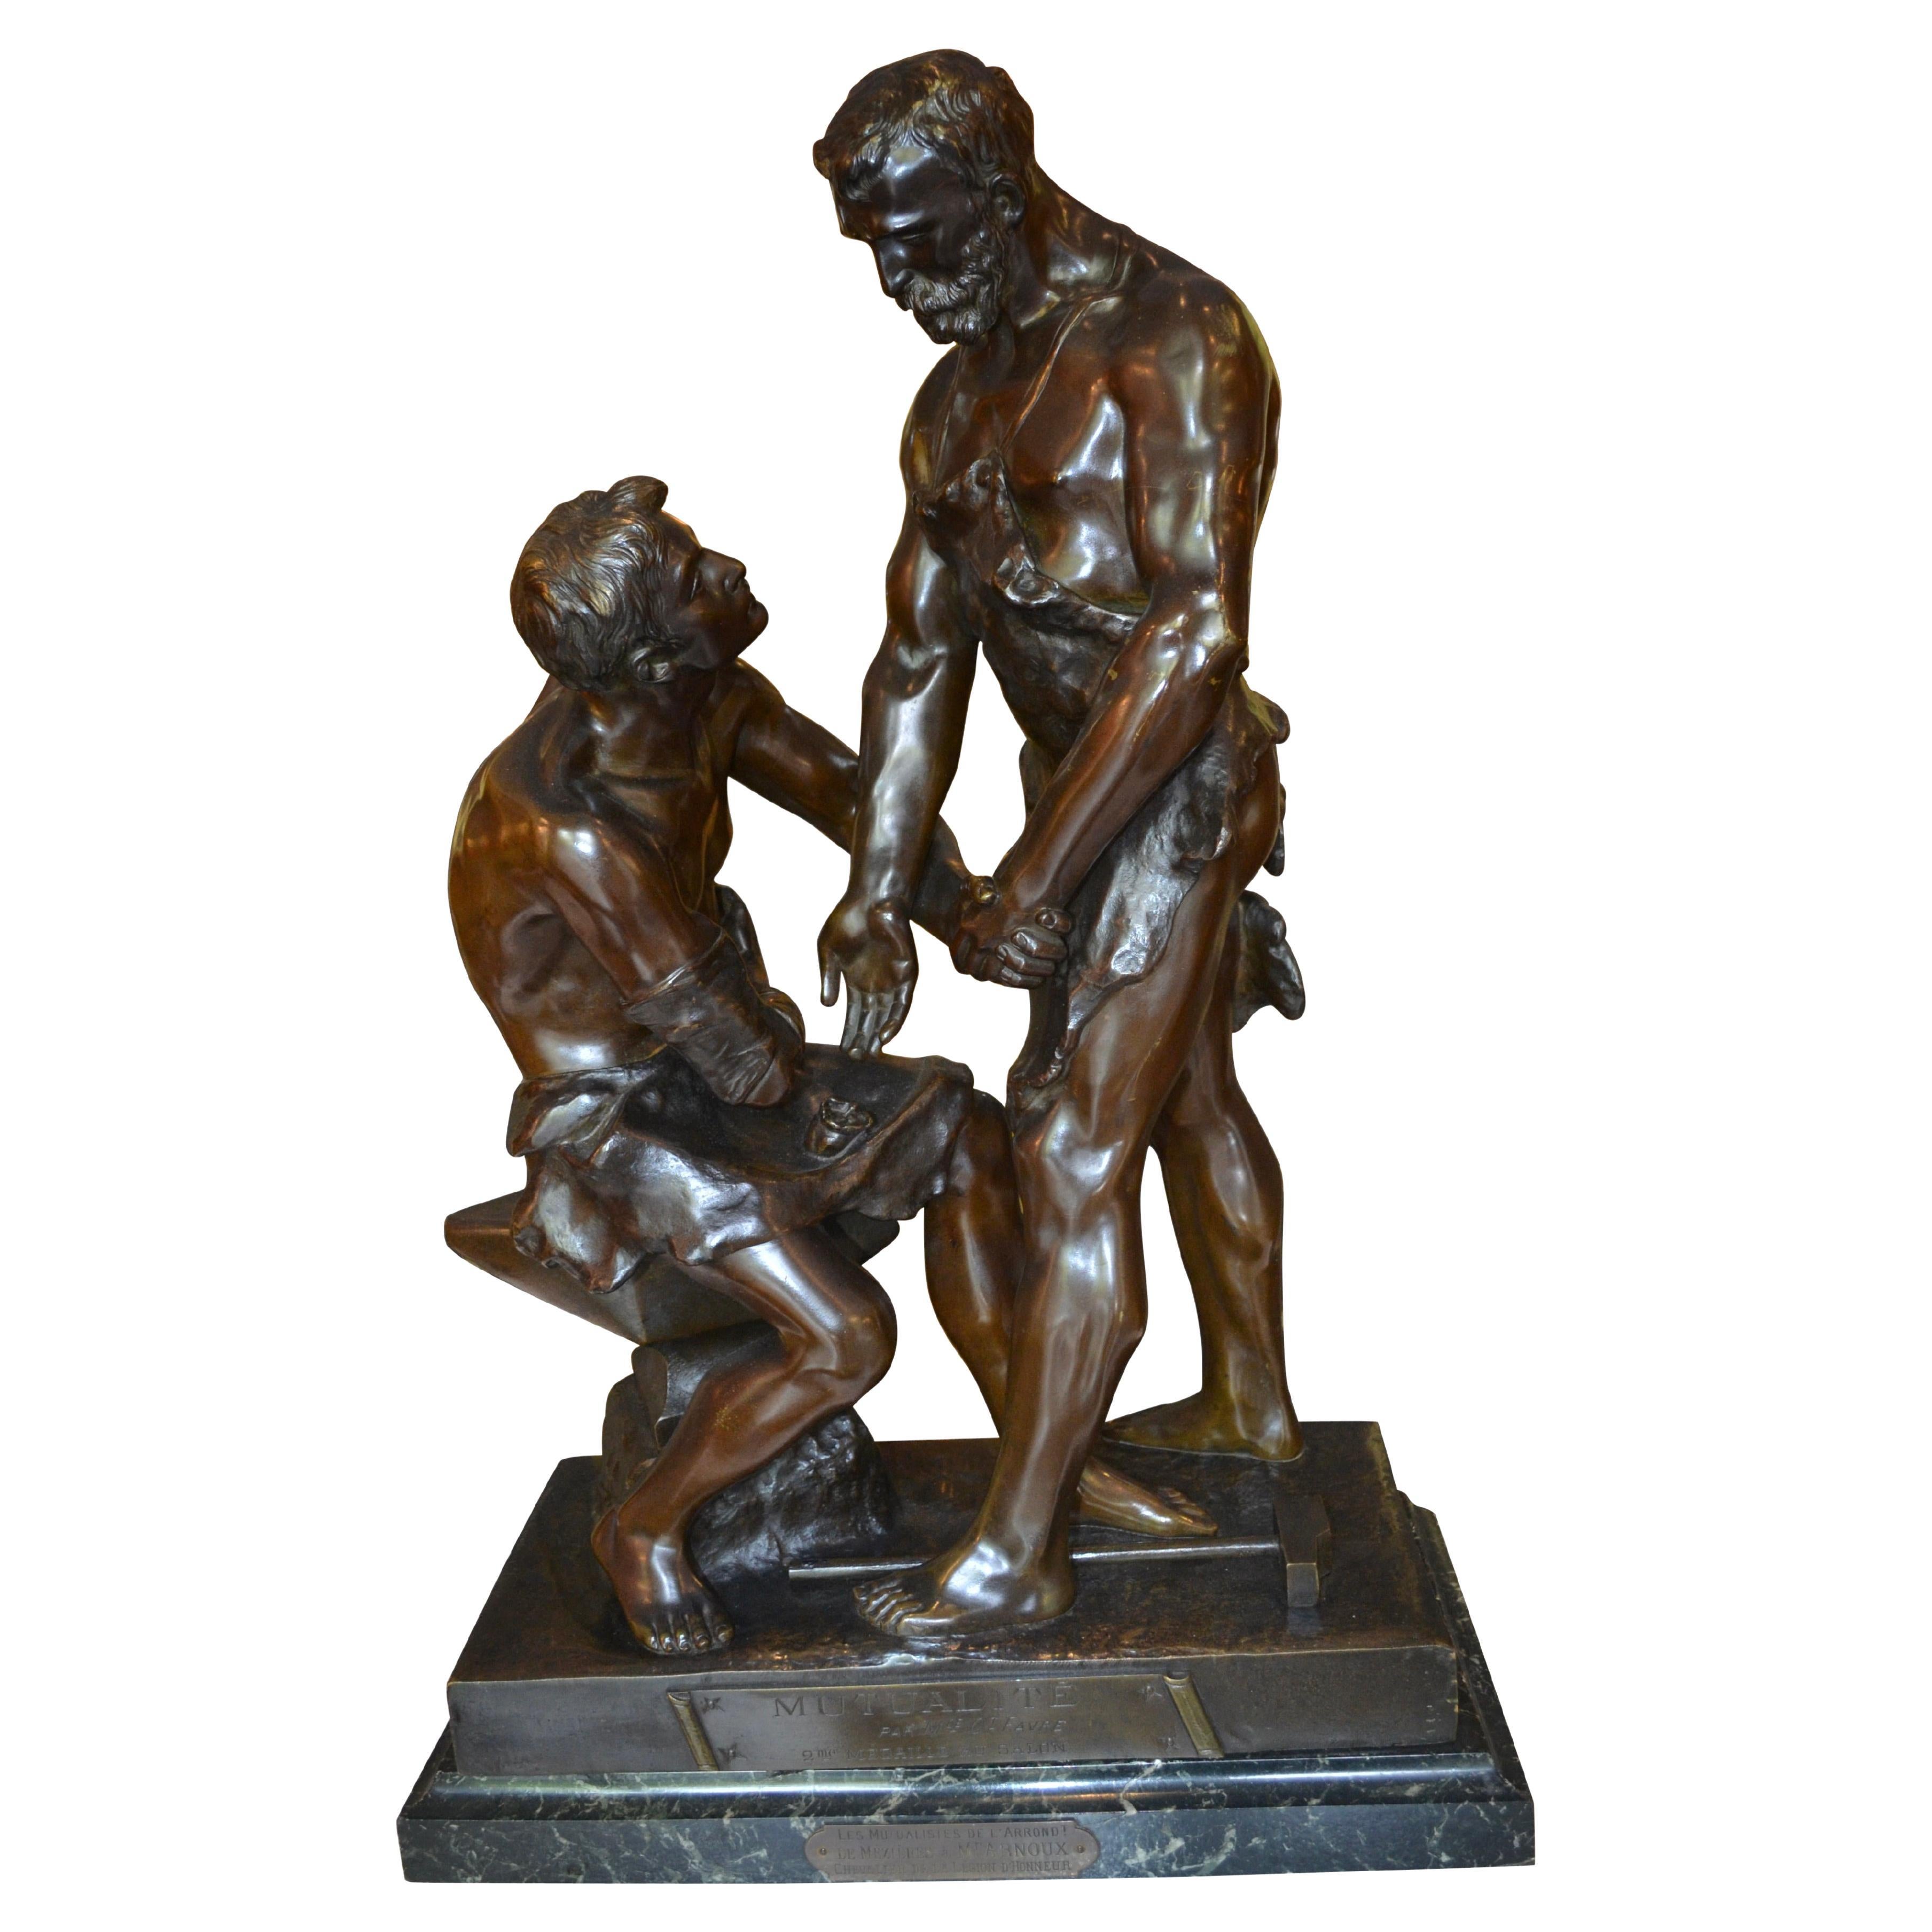 Rare 19 Century Bronze Statue Titled "Mutualite" by Maurice Constant Favre